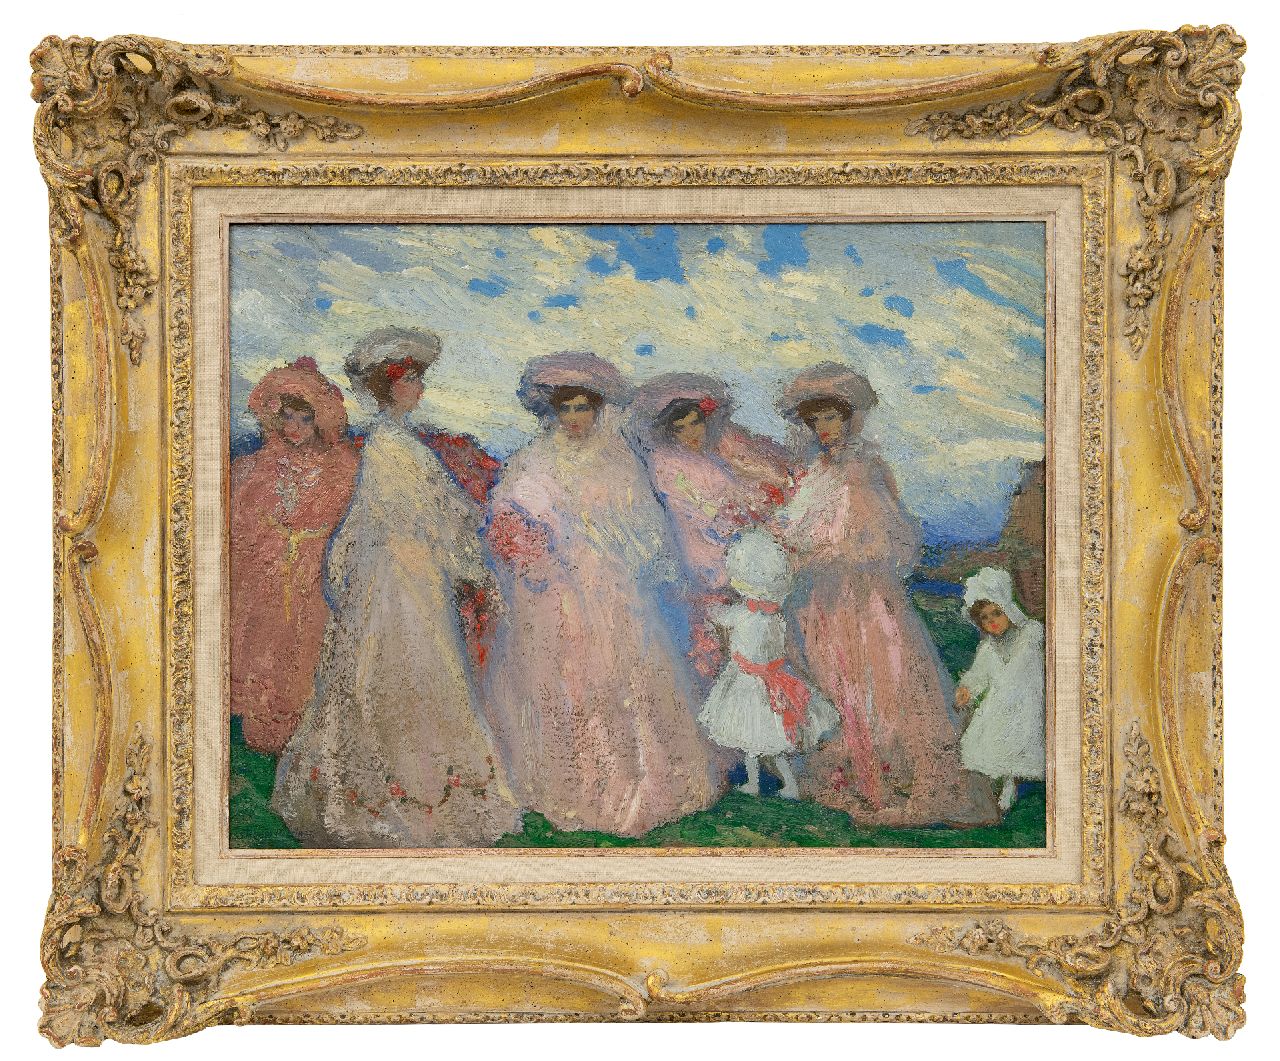 Ramos Martinez A.  | Alfredo Ramos Martinez | Paintings offered for sale | Ladies in a landscape, oil on panel 41.5 x 52.5 cm, signed l.l. and to be dated ca. 1905